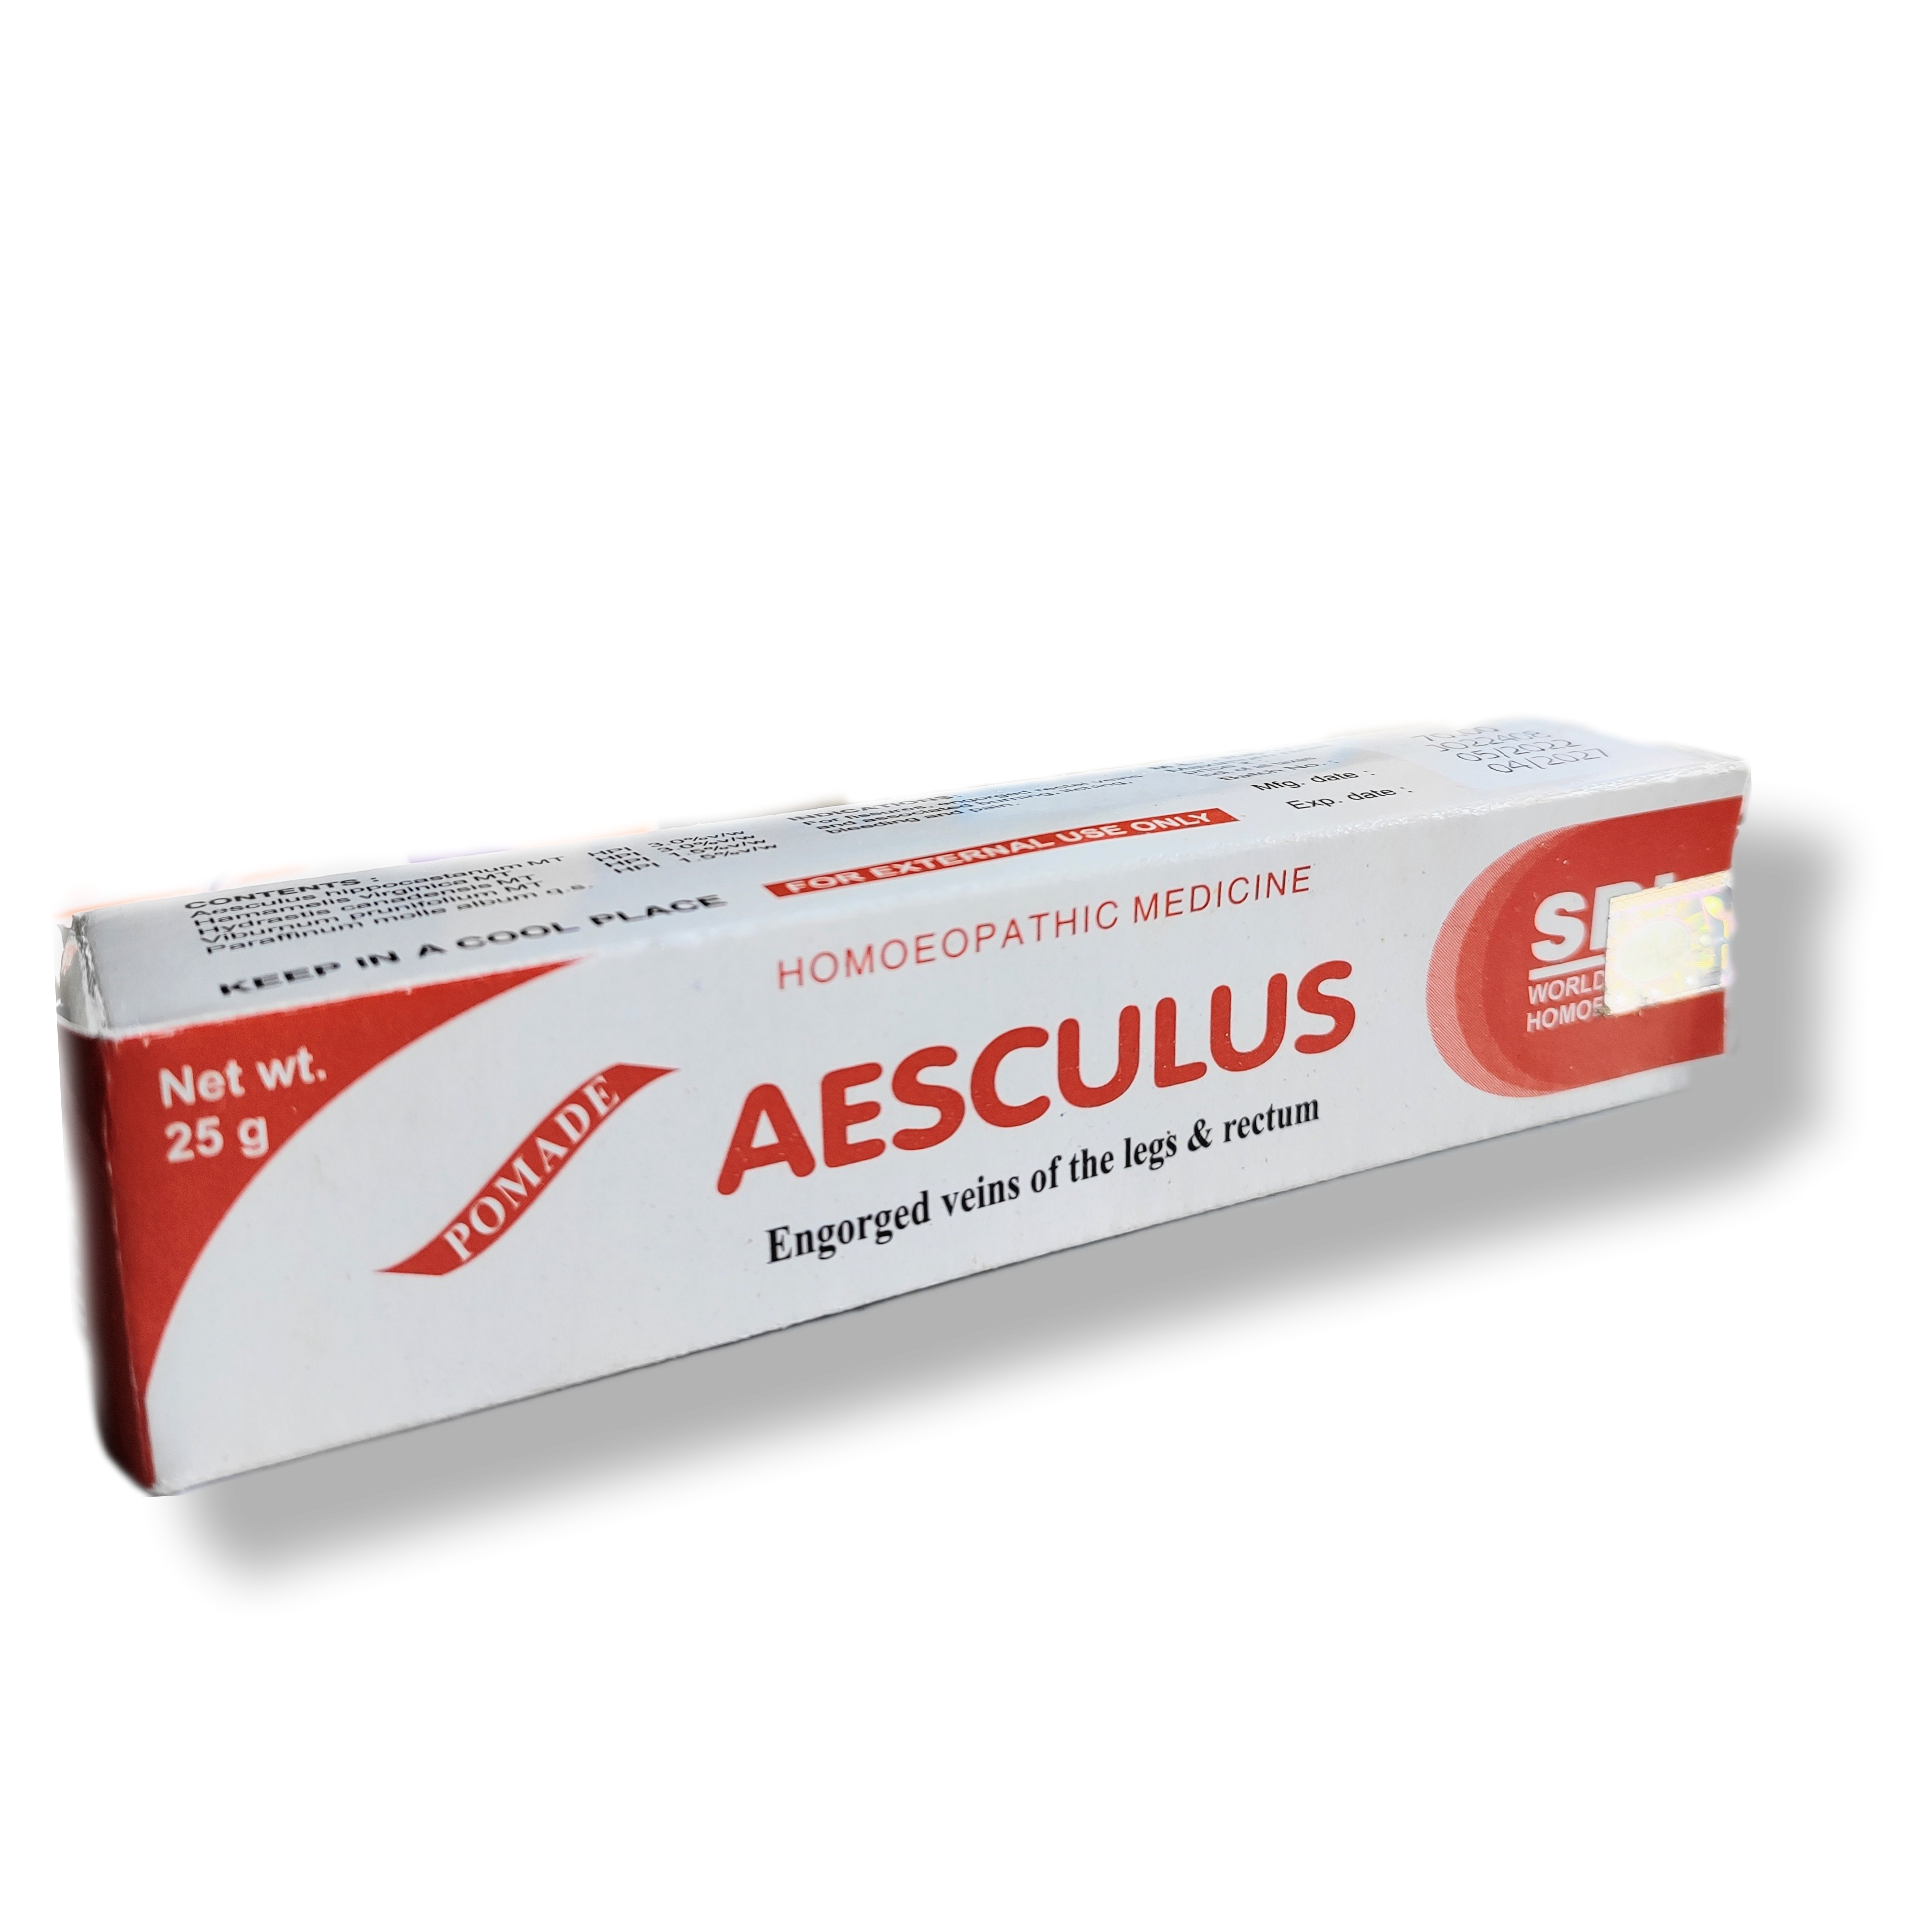 Aesculus ointment